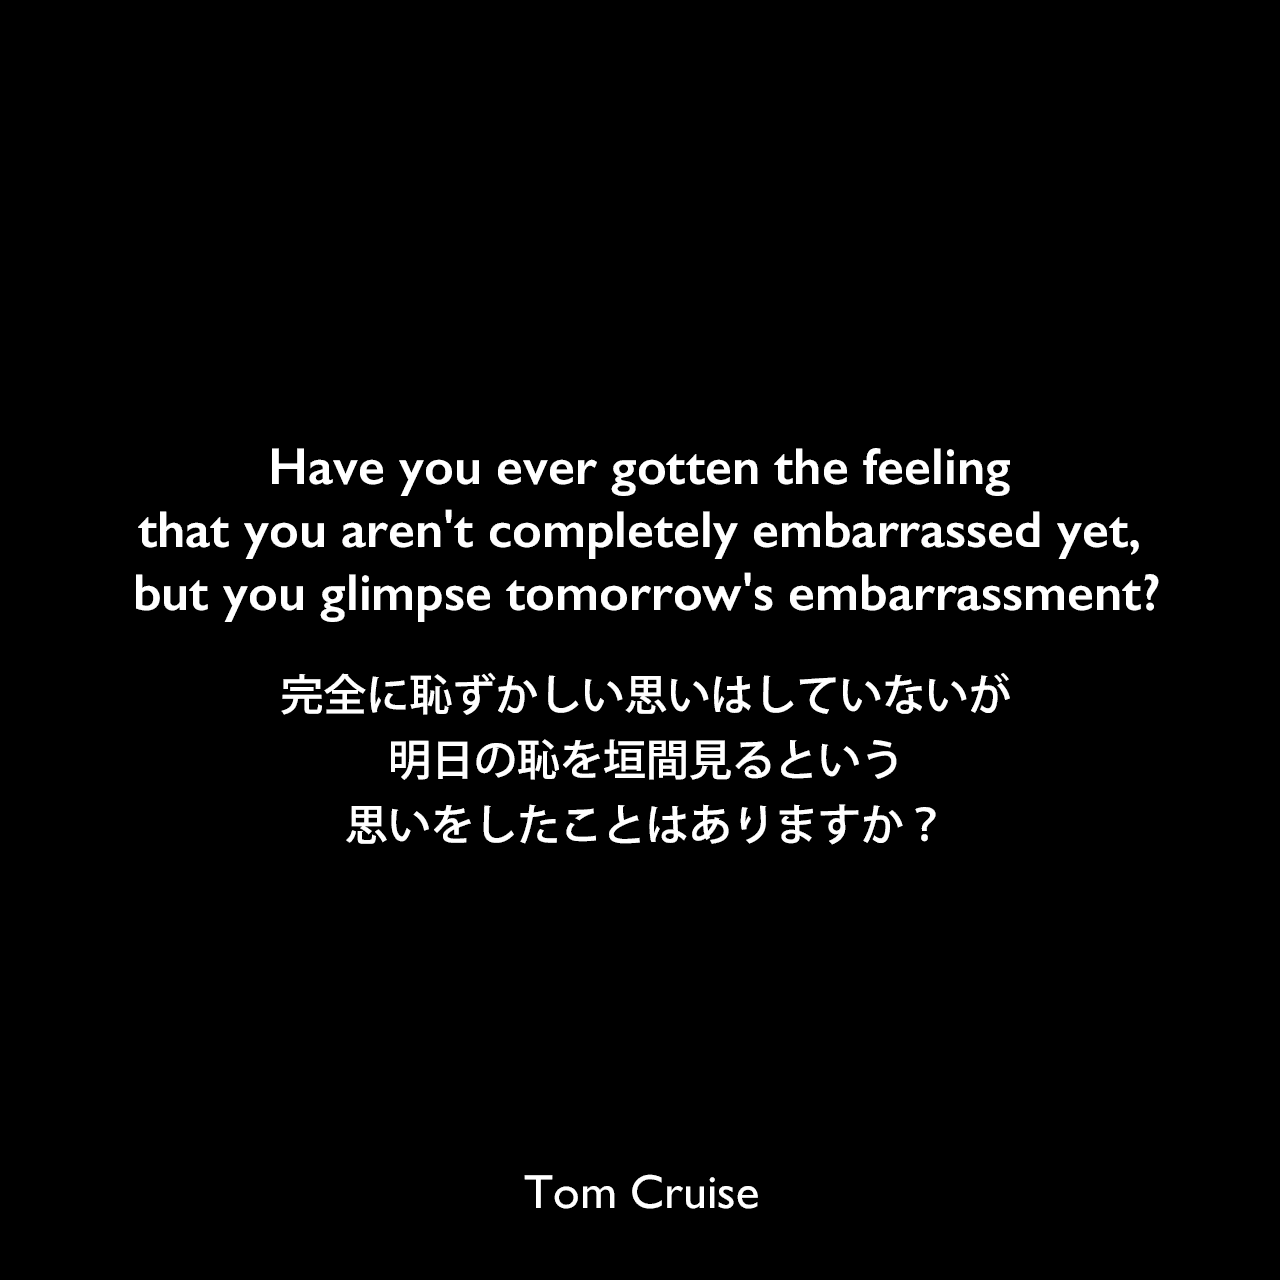 Have you ever gotten the feeling that you aren't completely embarrassed yet, but you glimpse tomorrow's embarrassment?完全に恥ずかしい思いはしていないが、明日の恥を垣間見るという思いをしたことはありますか？Tom Cruise